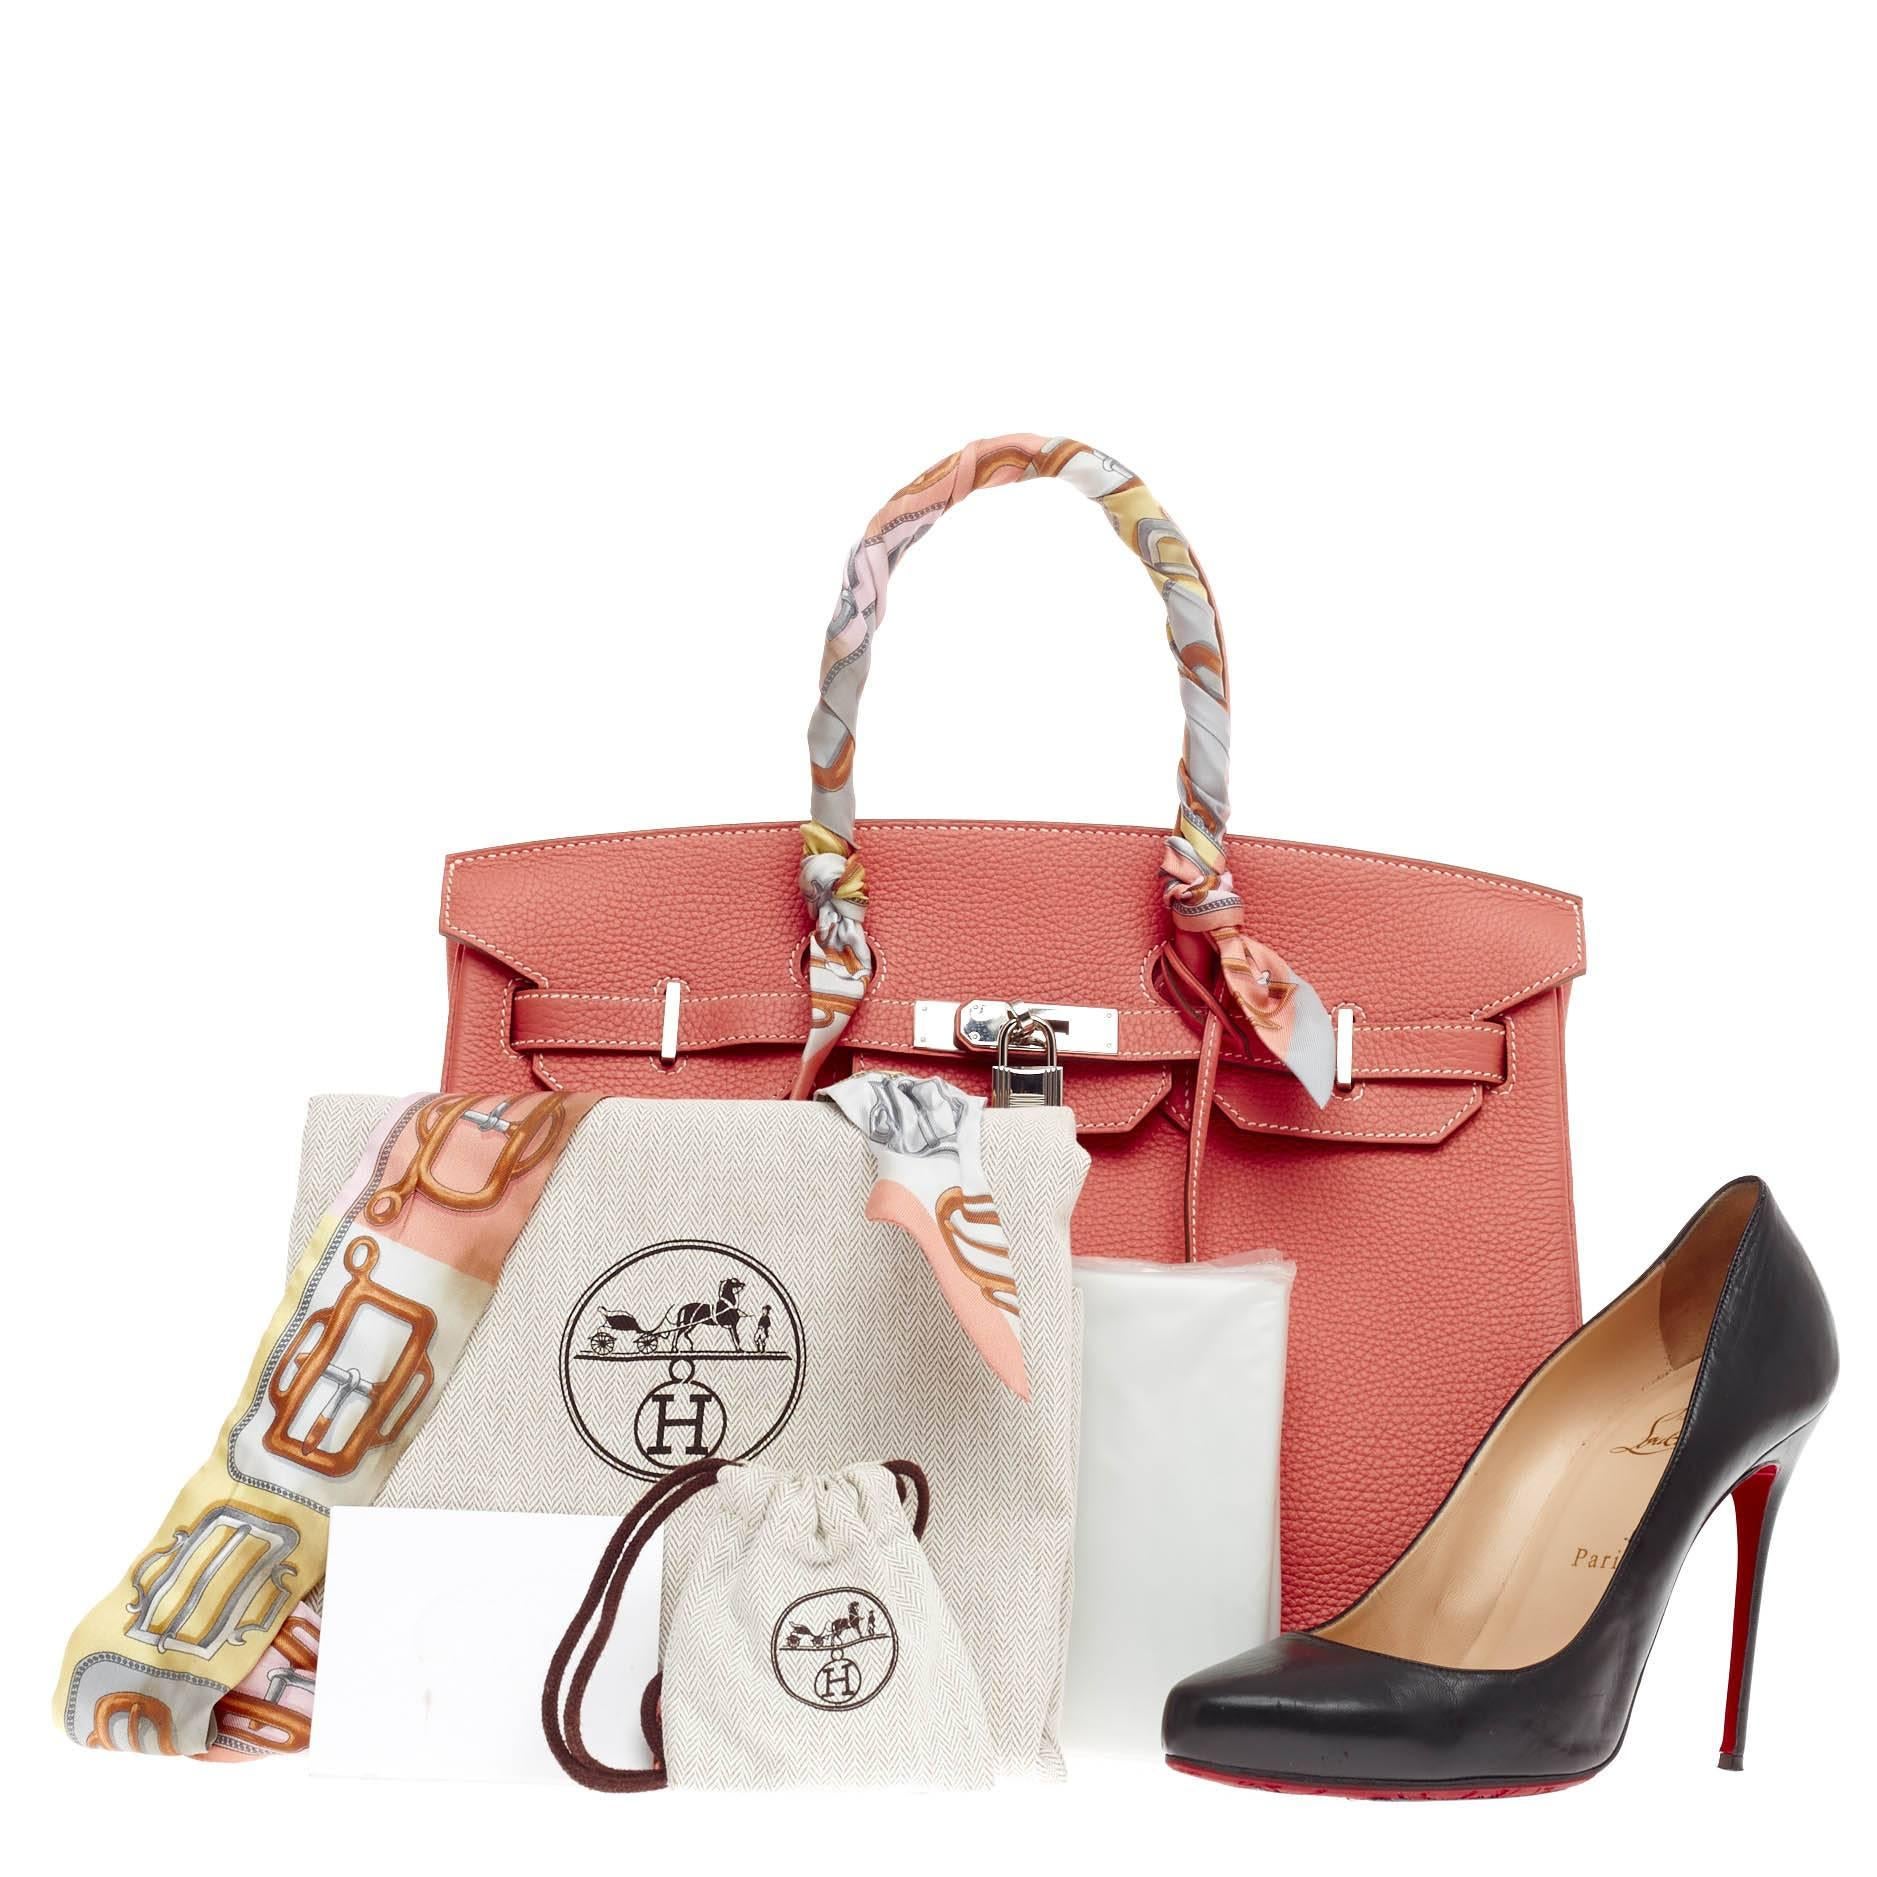 This authentic Hermes Birkin Crevette Clemence with Palladium Hardware 35 is the quintessential dream bag for the modern woman. Crafted in luxurious and scratch-resistant crevette pink clemence leather, this iconic tote features a matching leather